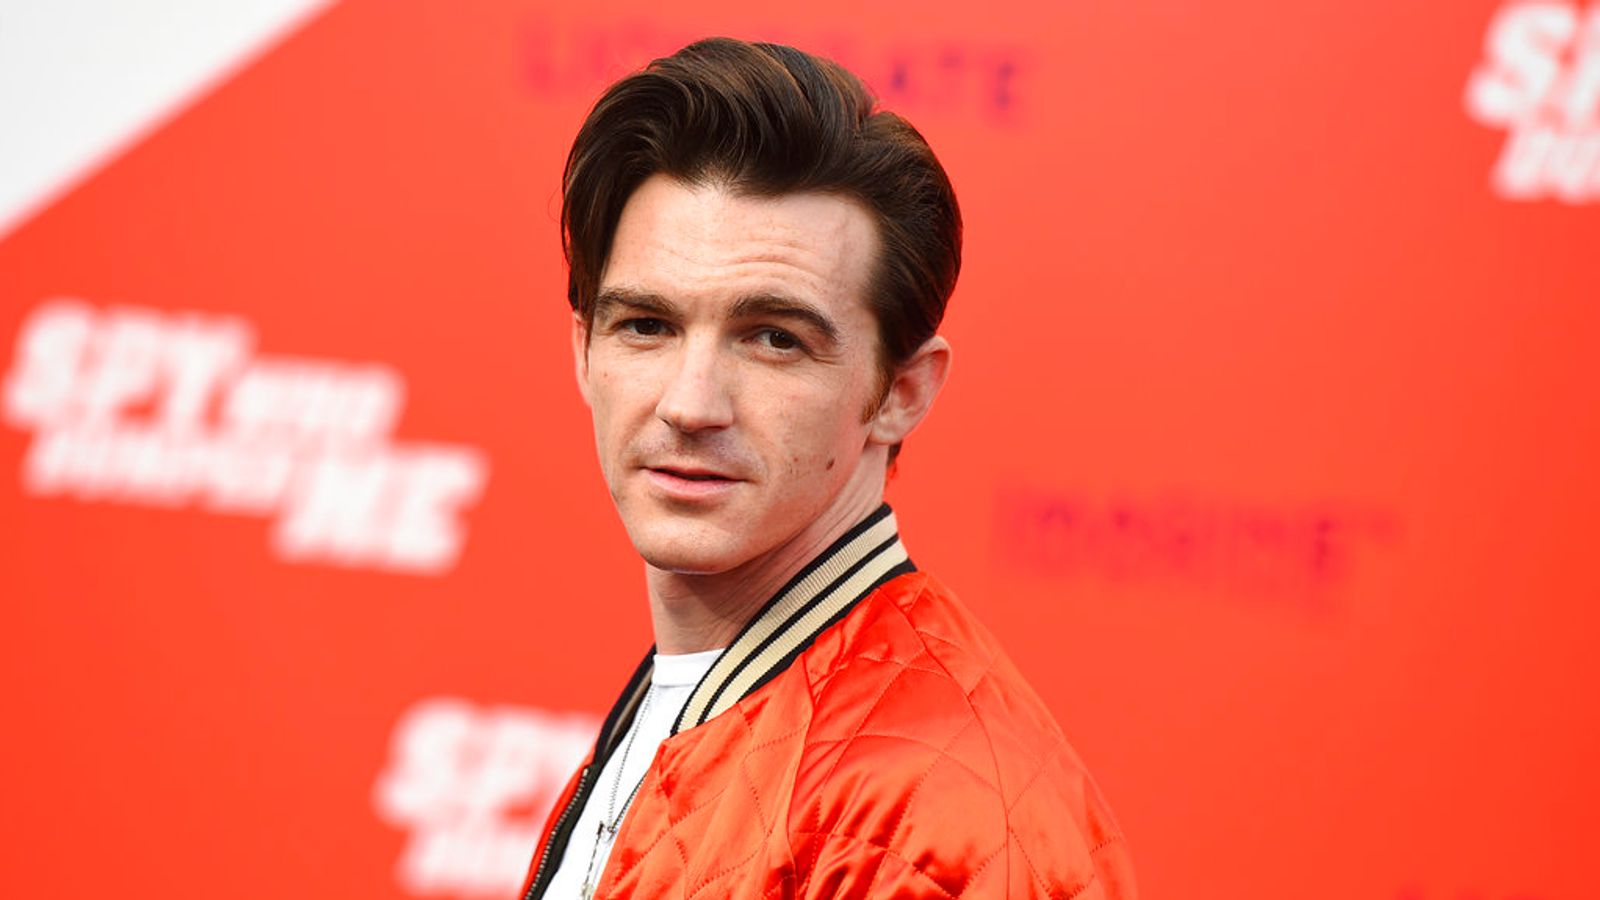 Nickelodeon star Drake Bell reported missing by police